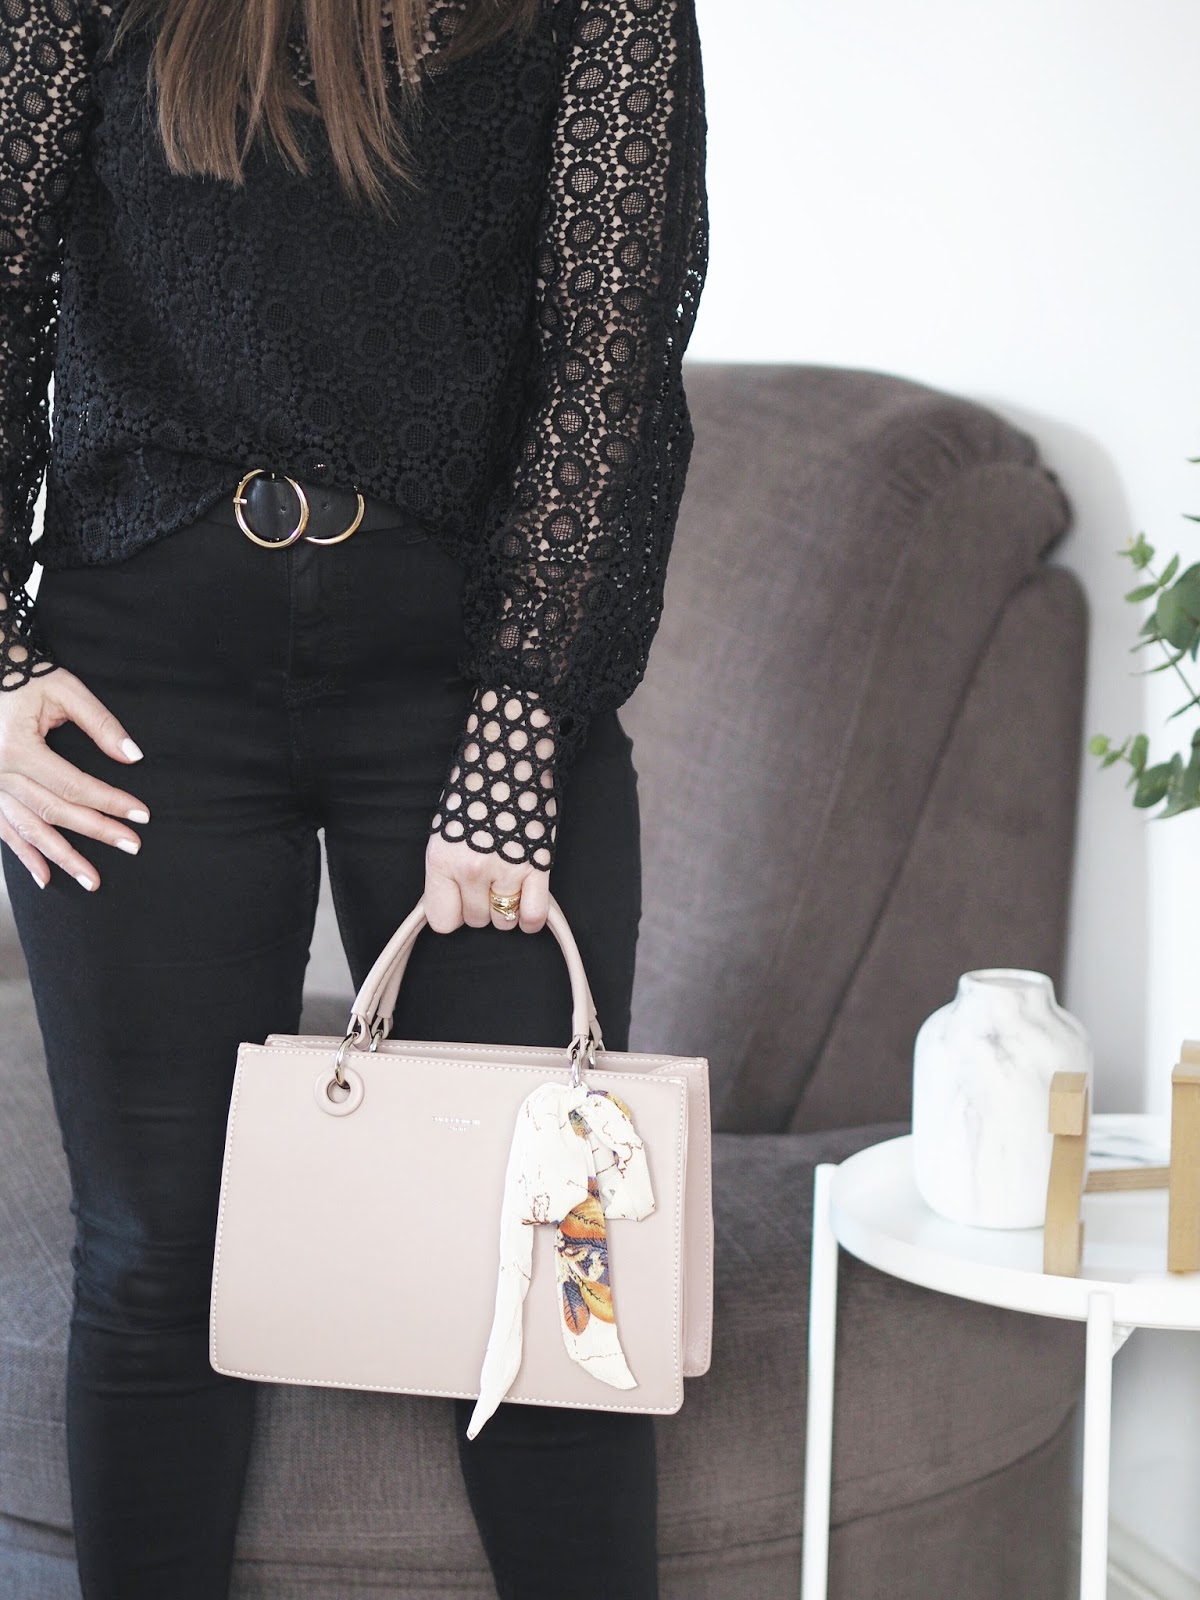 H&M lace blouse \ Priceless Life of Mine \ over 40 lifestyle blog